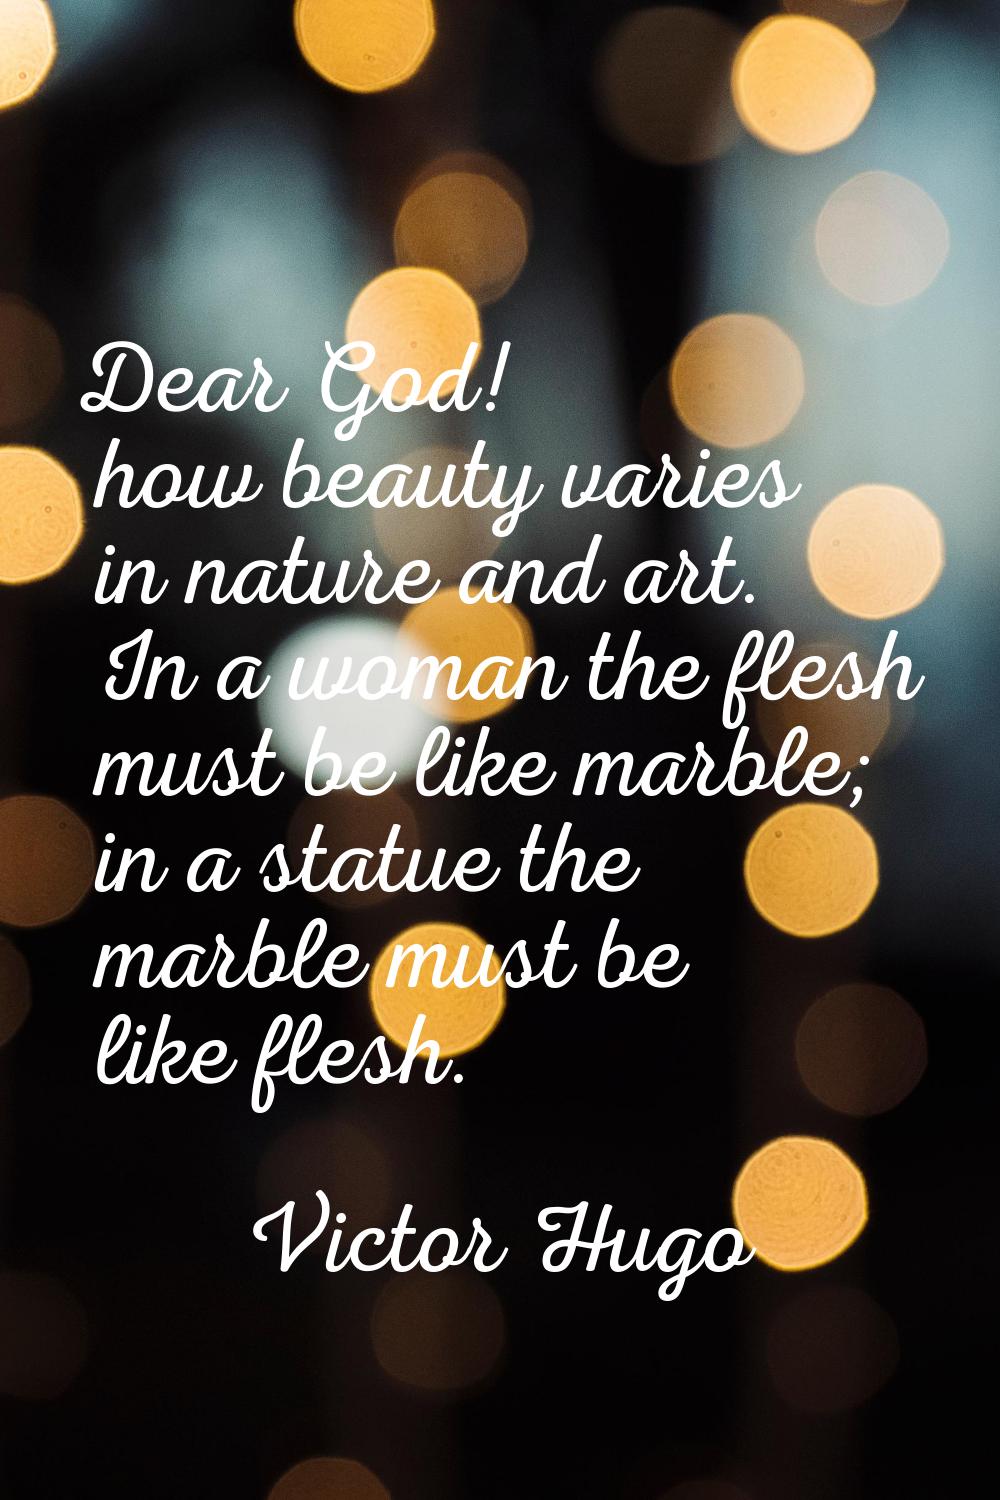 Dear God! how beauty varies in nature and art. In a woman the flesh must be like marble; in a statu